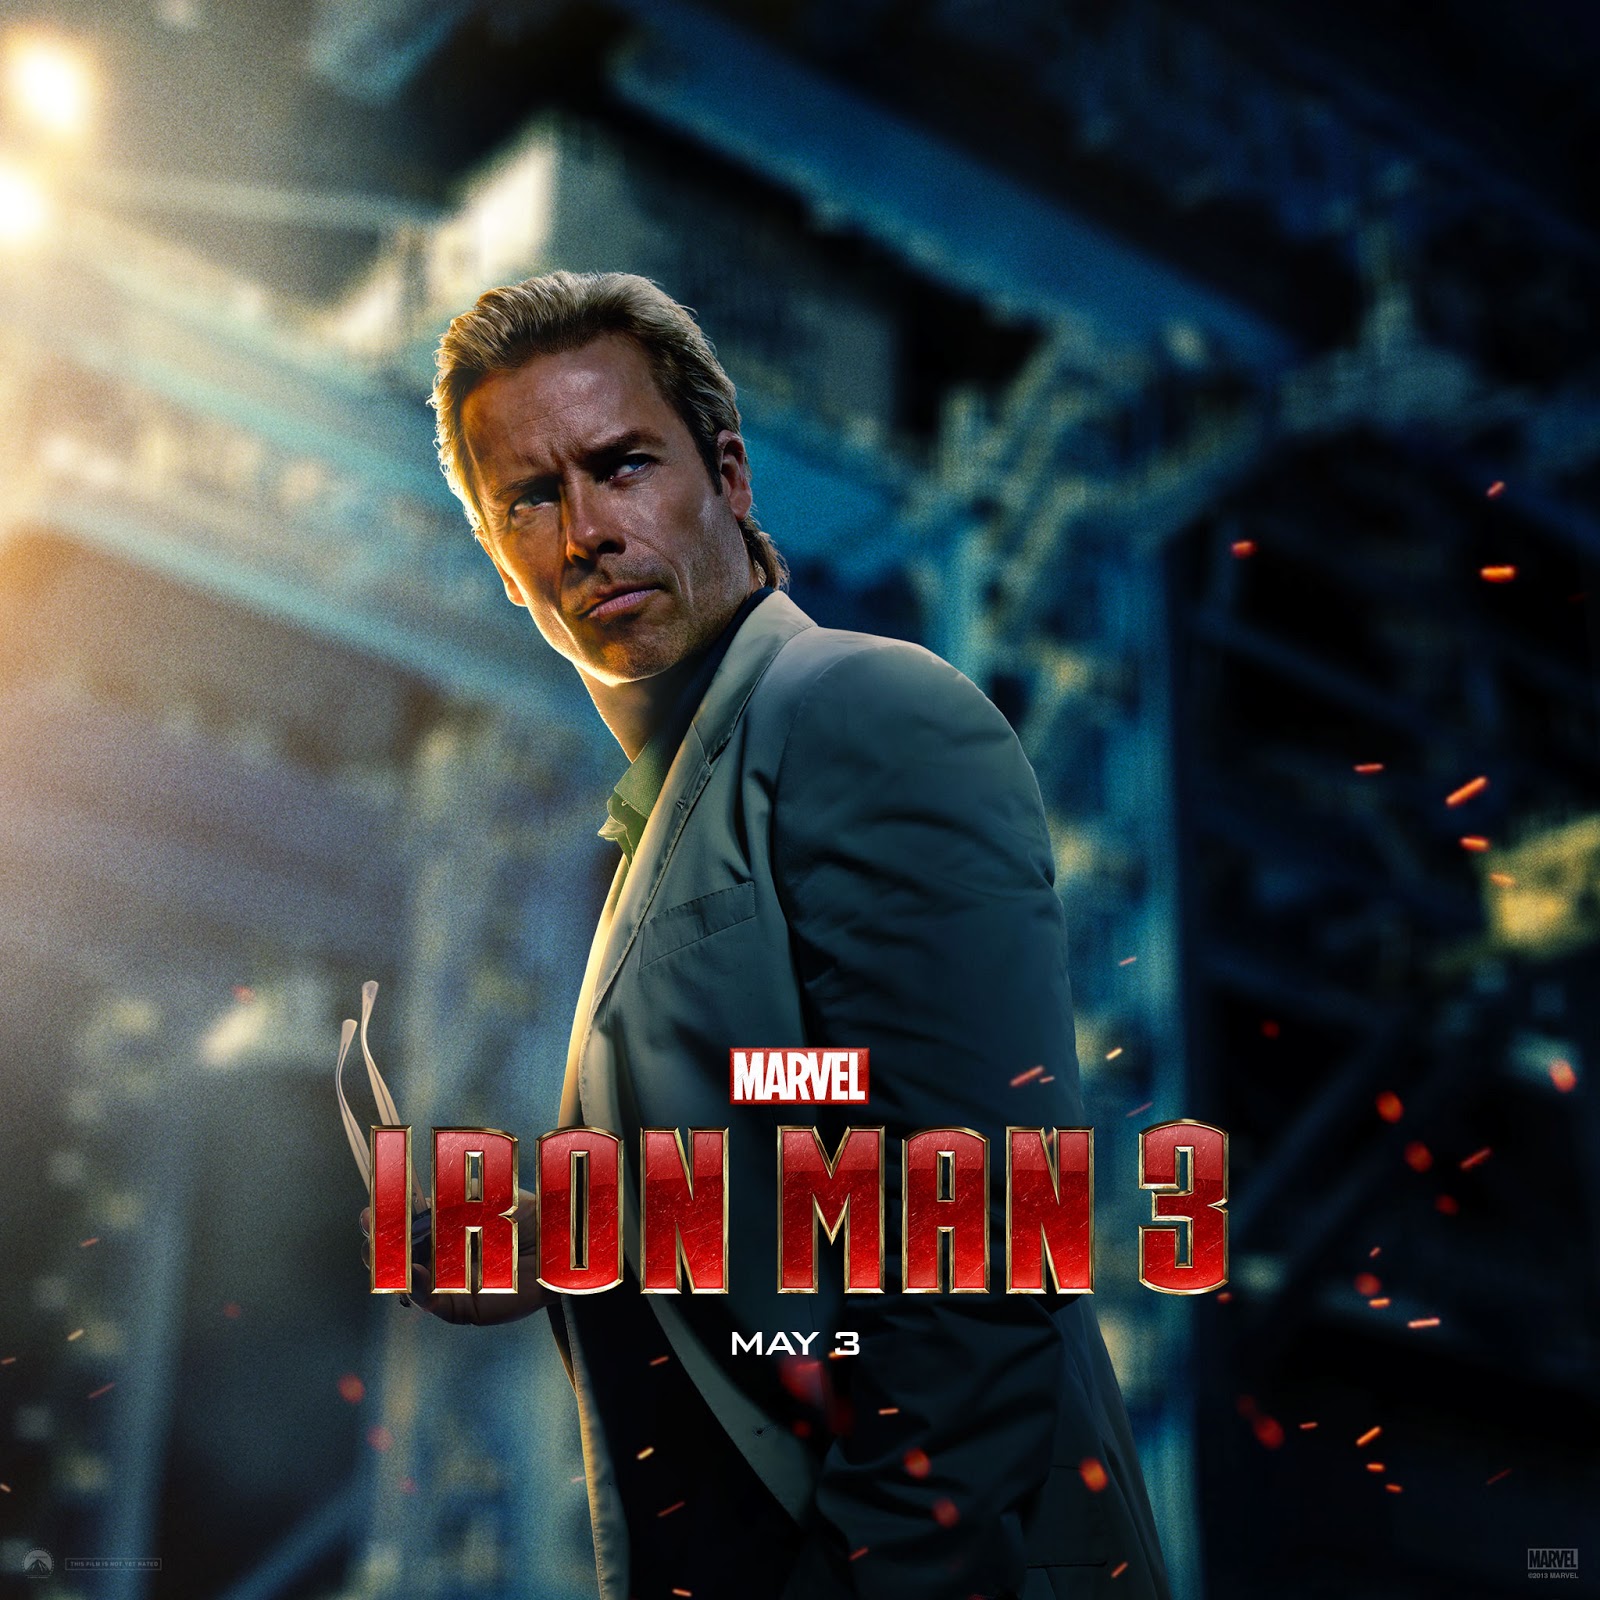 Everything about PowerPoint & Wallpaper: Free Download Official Iron Man 3 Movie Wallpaper